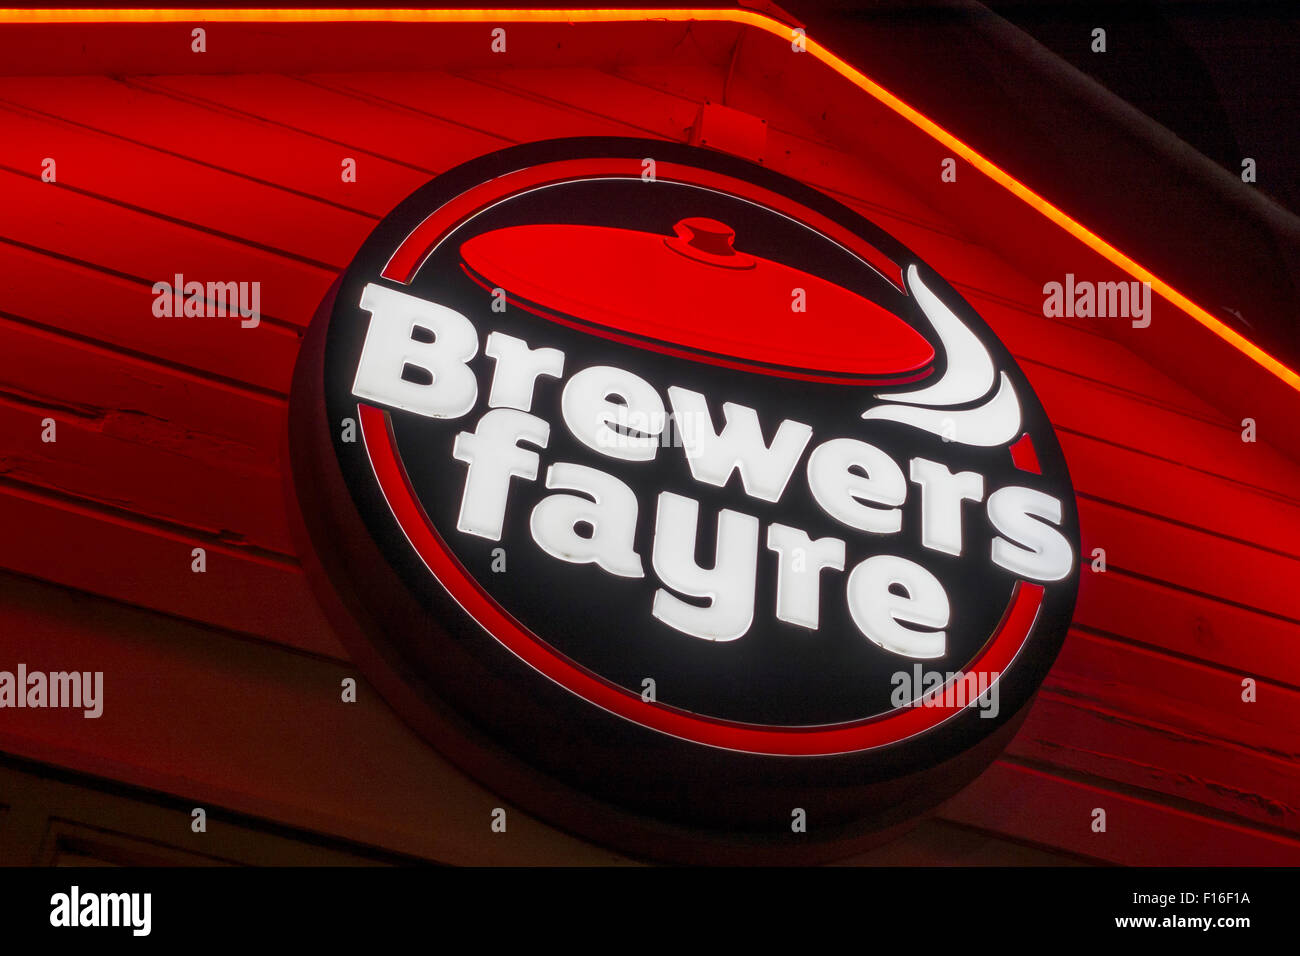 Brewers Fayre Restaurant Sign Foto Stock